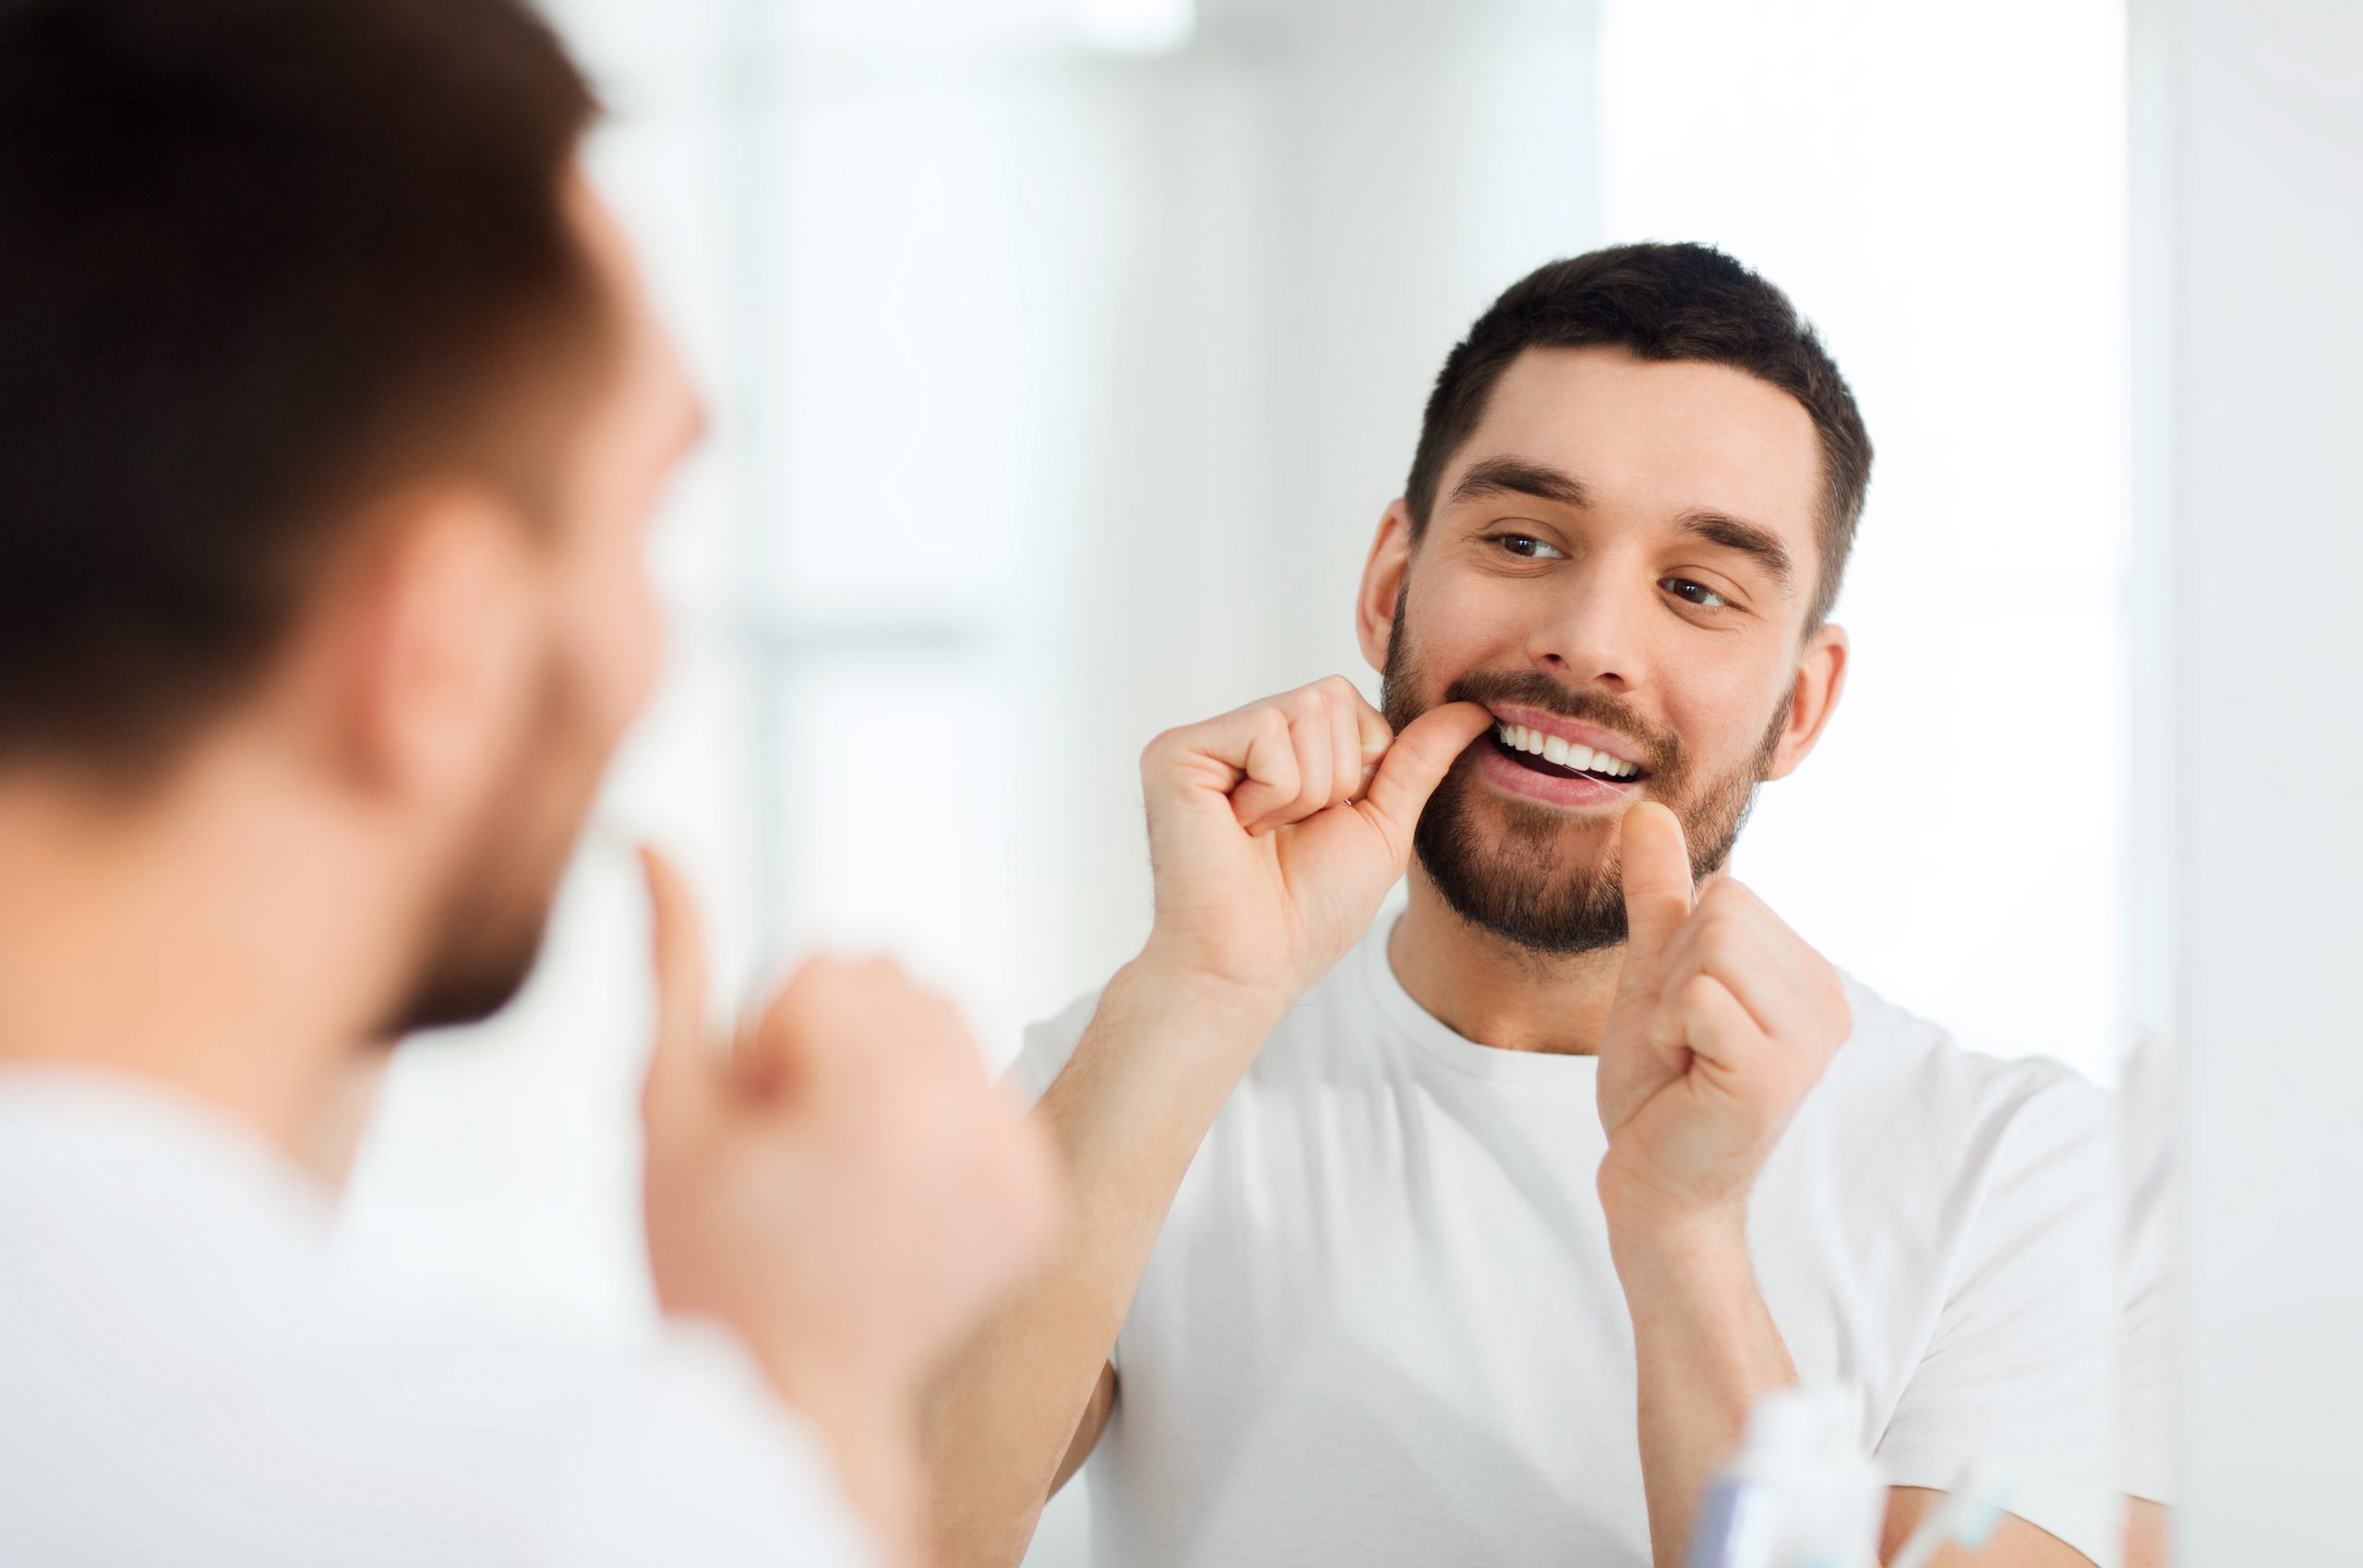 Man flossing his teeth before dental hygienist appointment at Maidstone, Kent